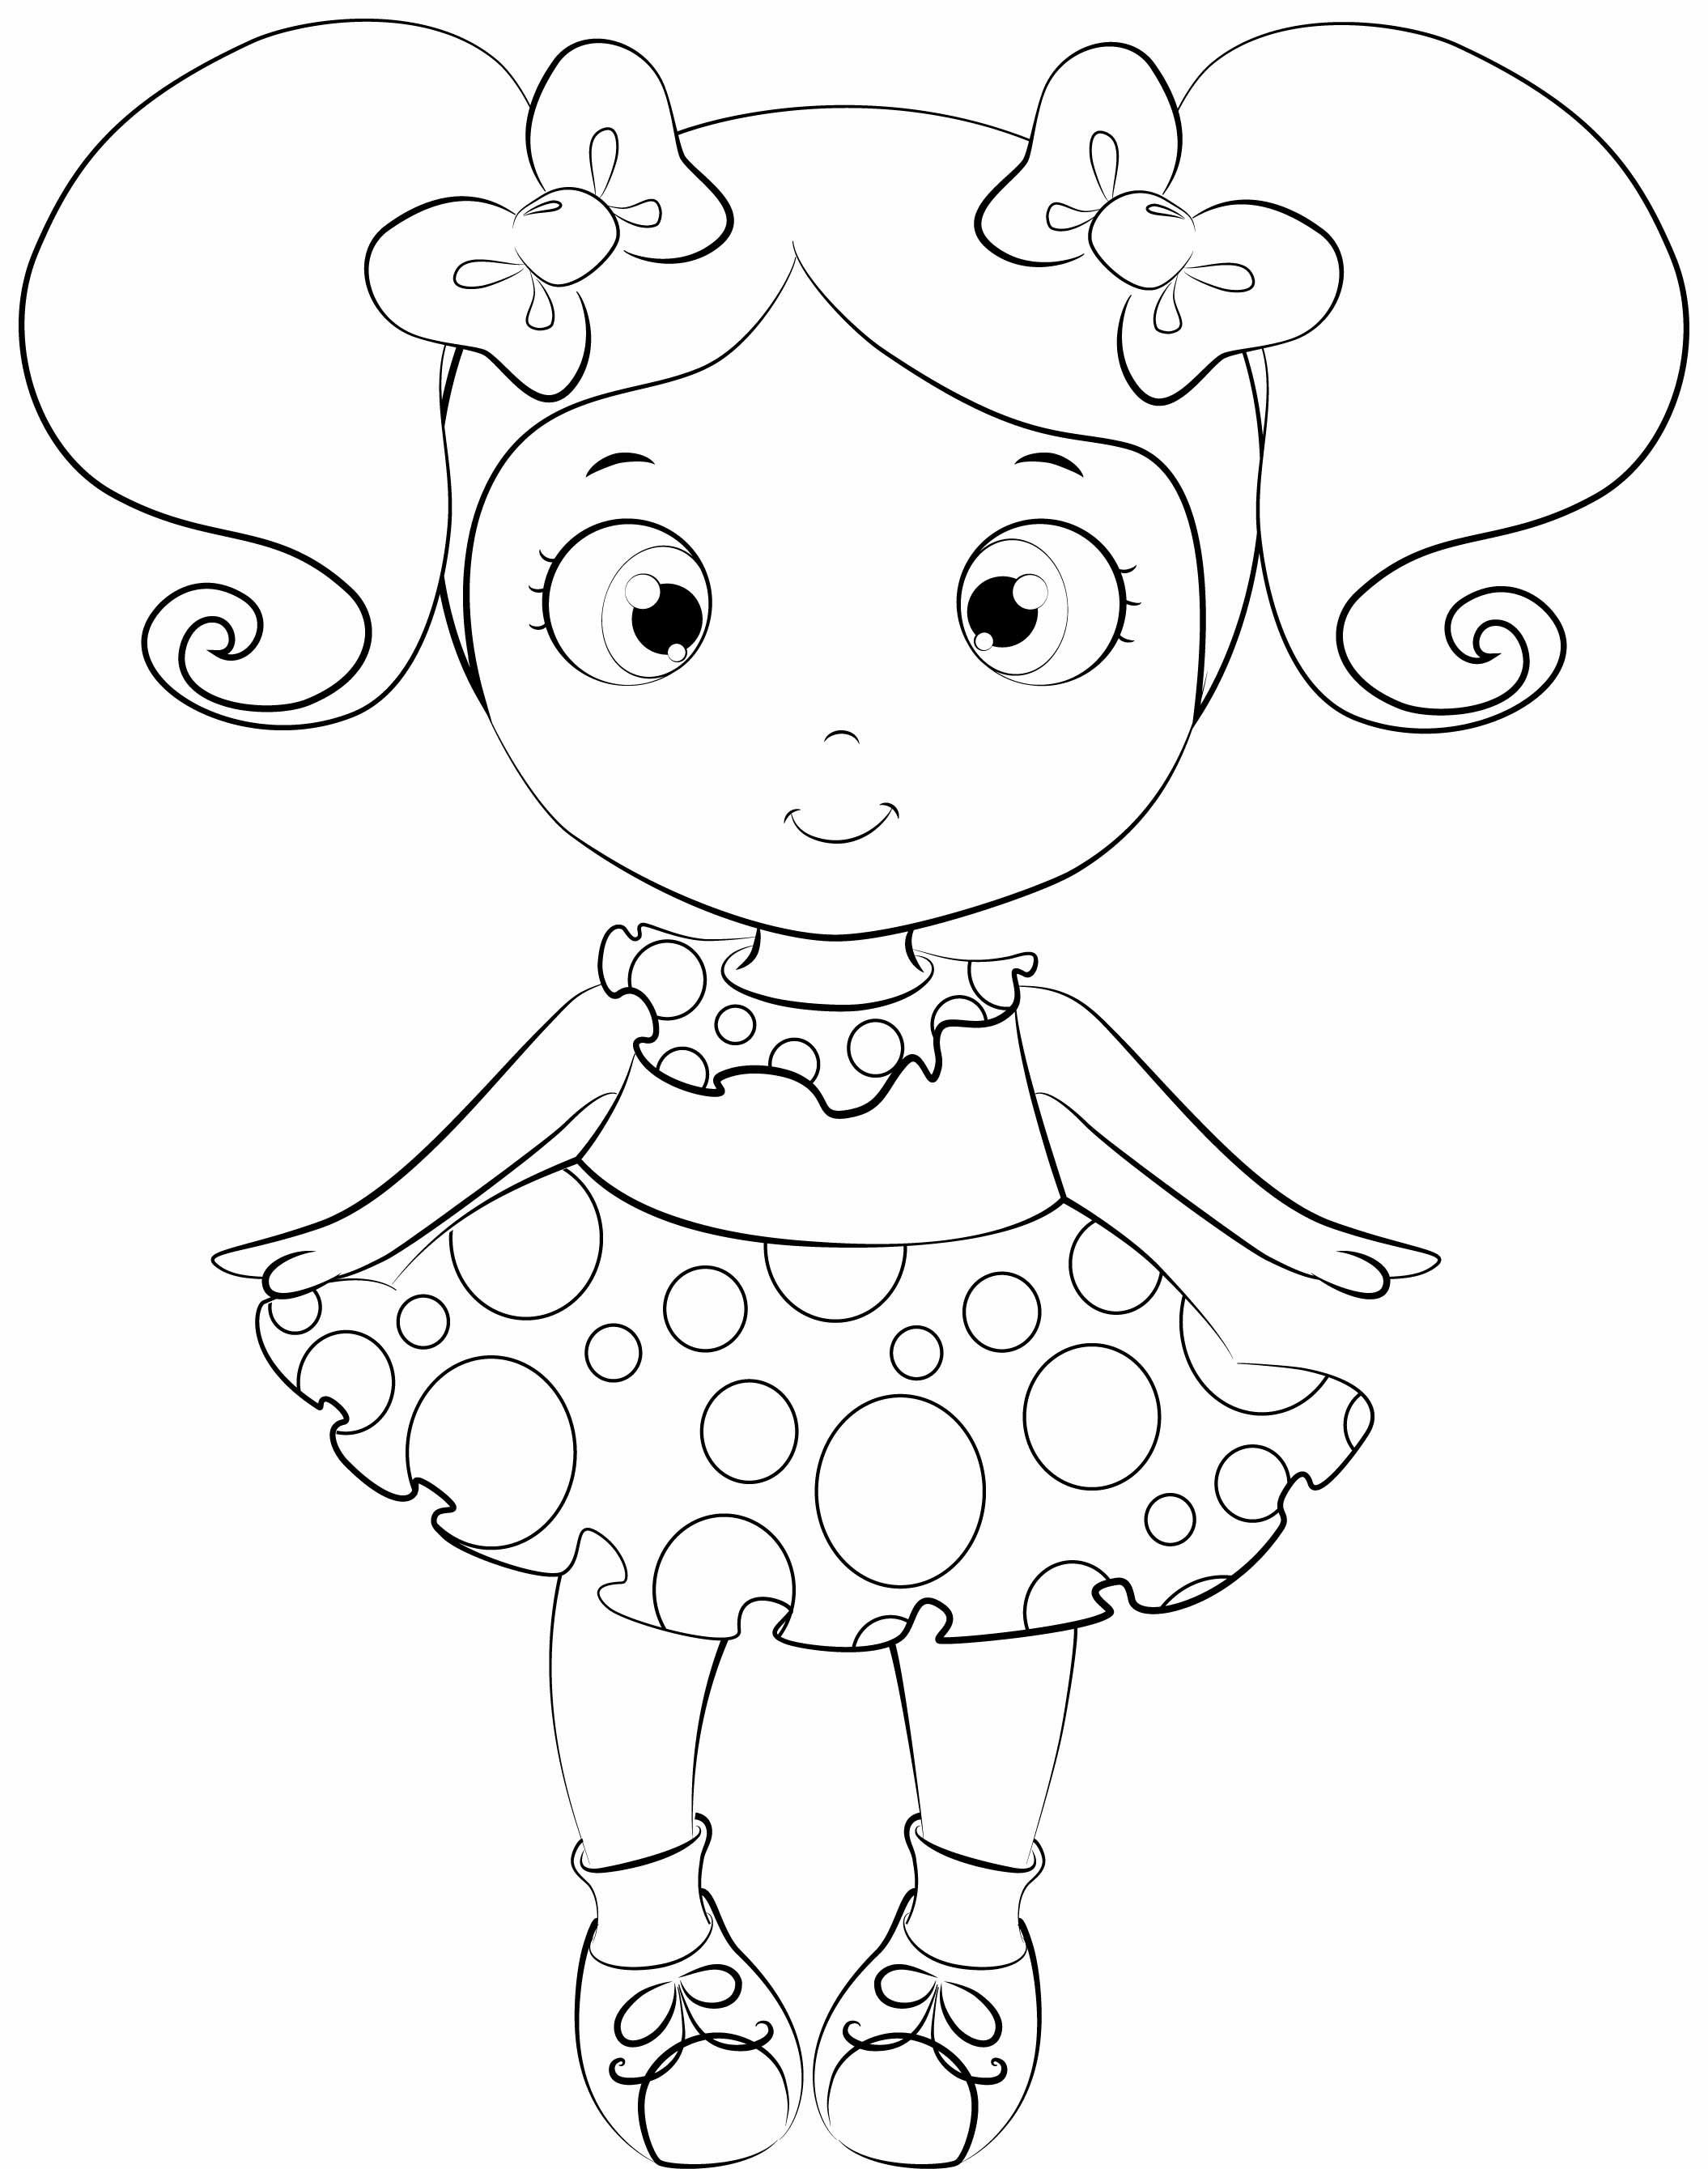 Lol Colouring Pages at GetColorings.com | Free printable colorings ...